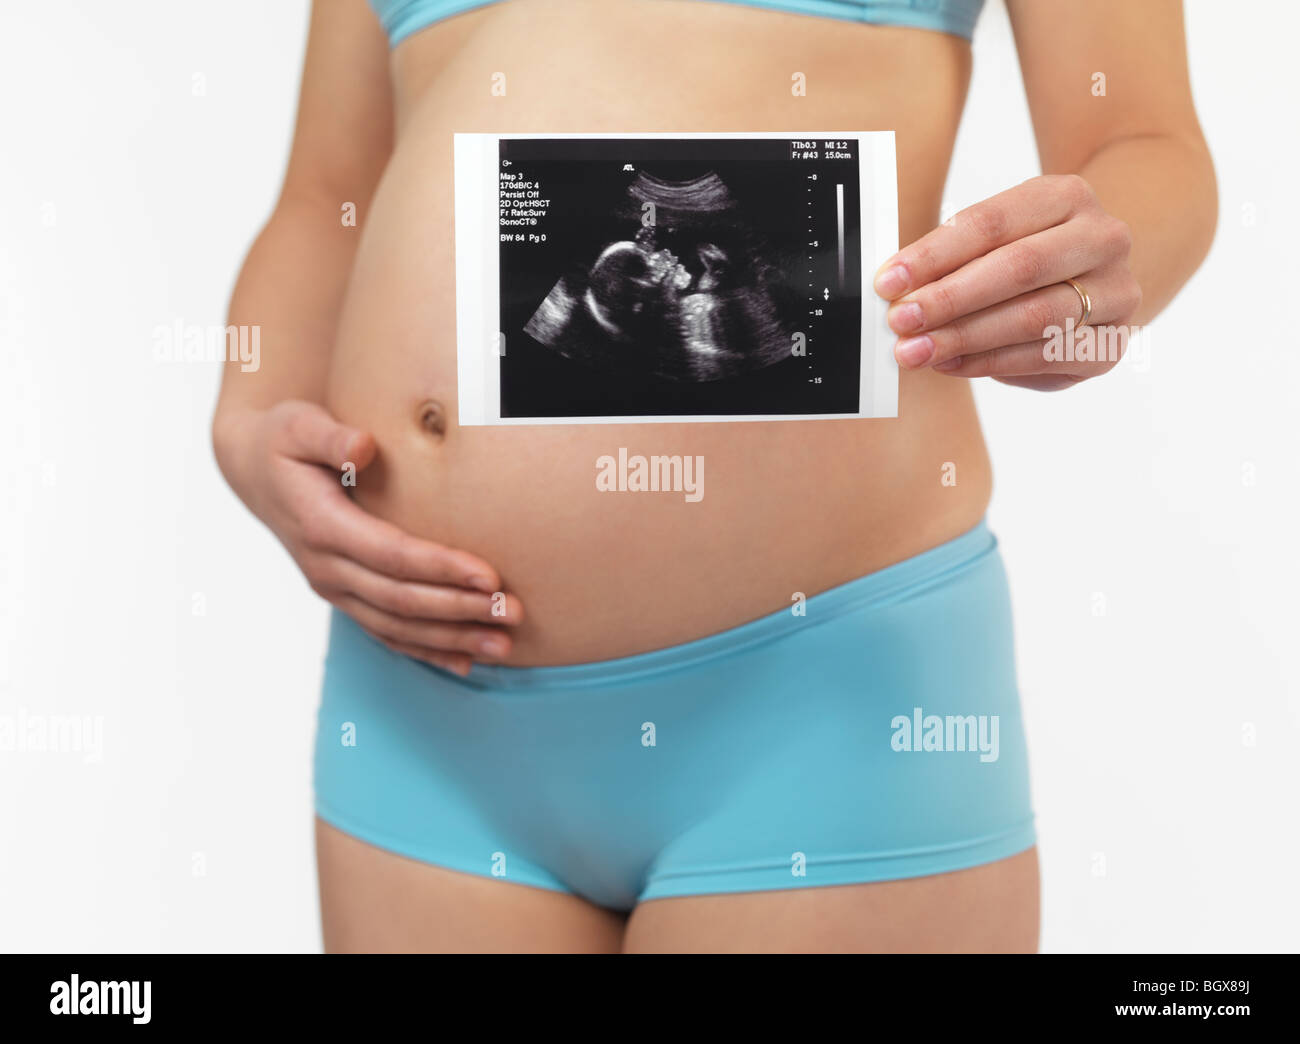 Pregnant woman holding ultrasound imaging picture of her baby. Five months old fetus. Isolated on white background. Stock Photo